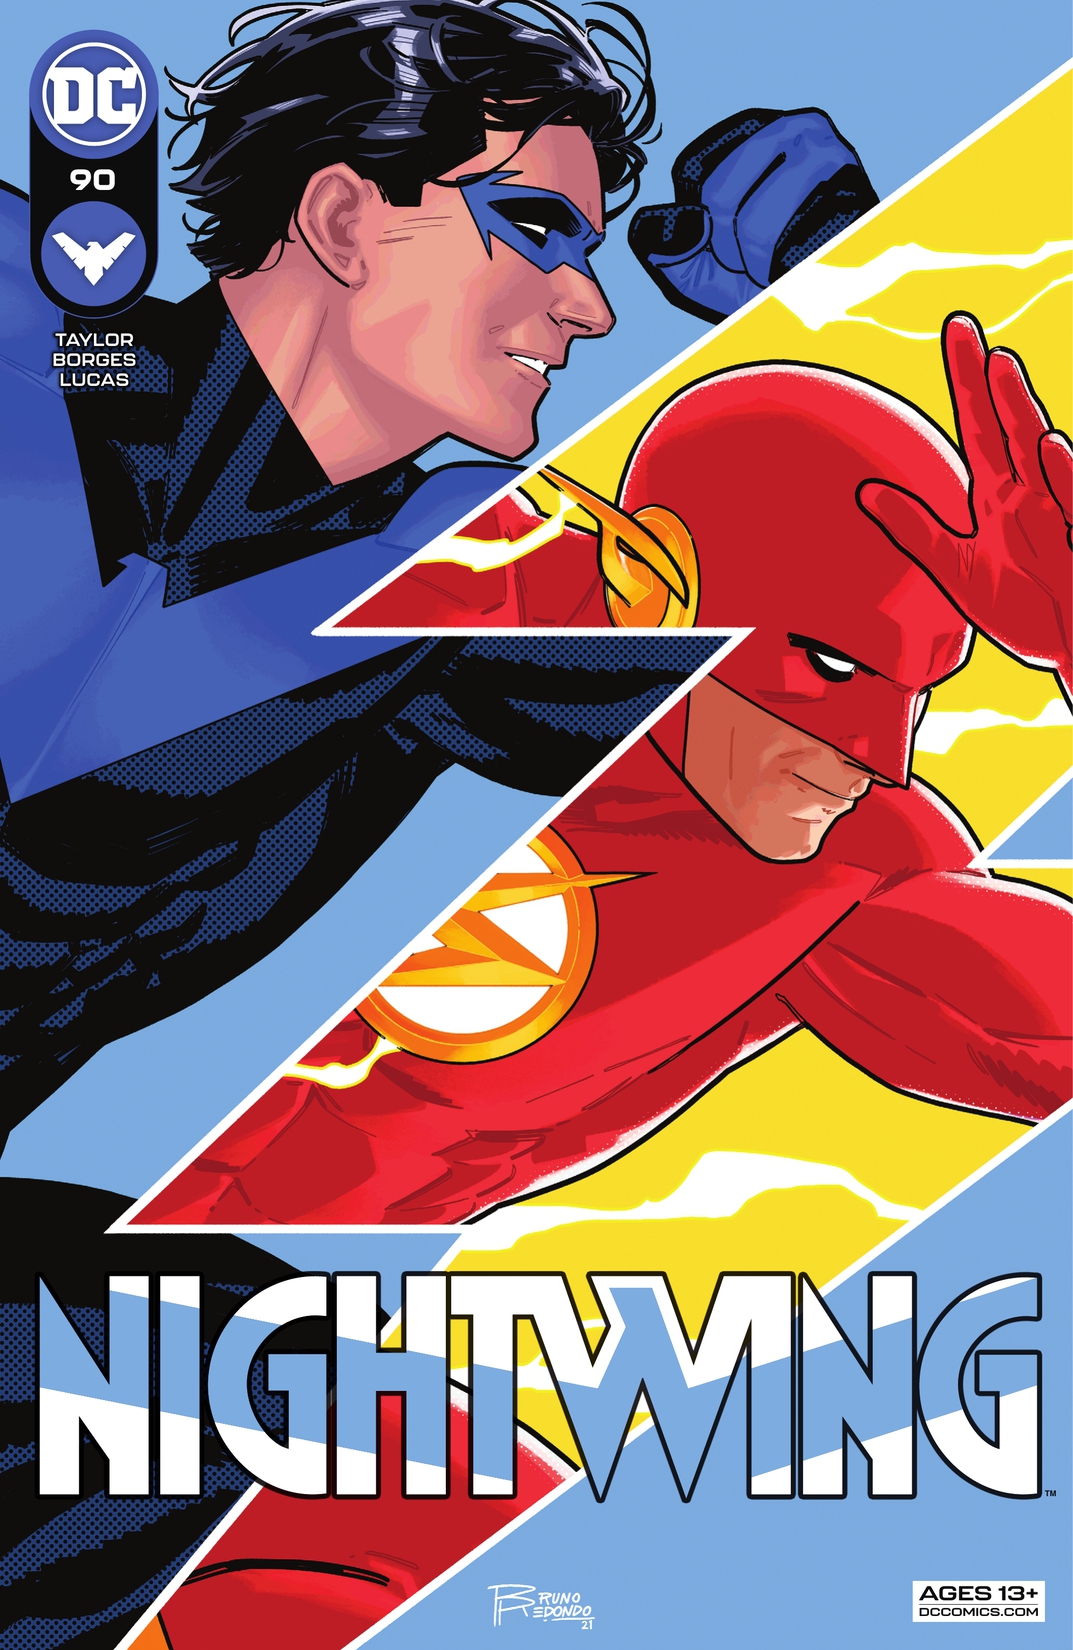 Nightwing (2016-) #90 preview images